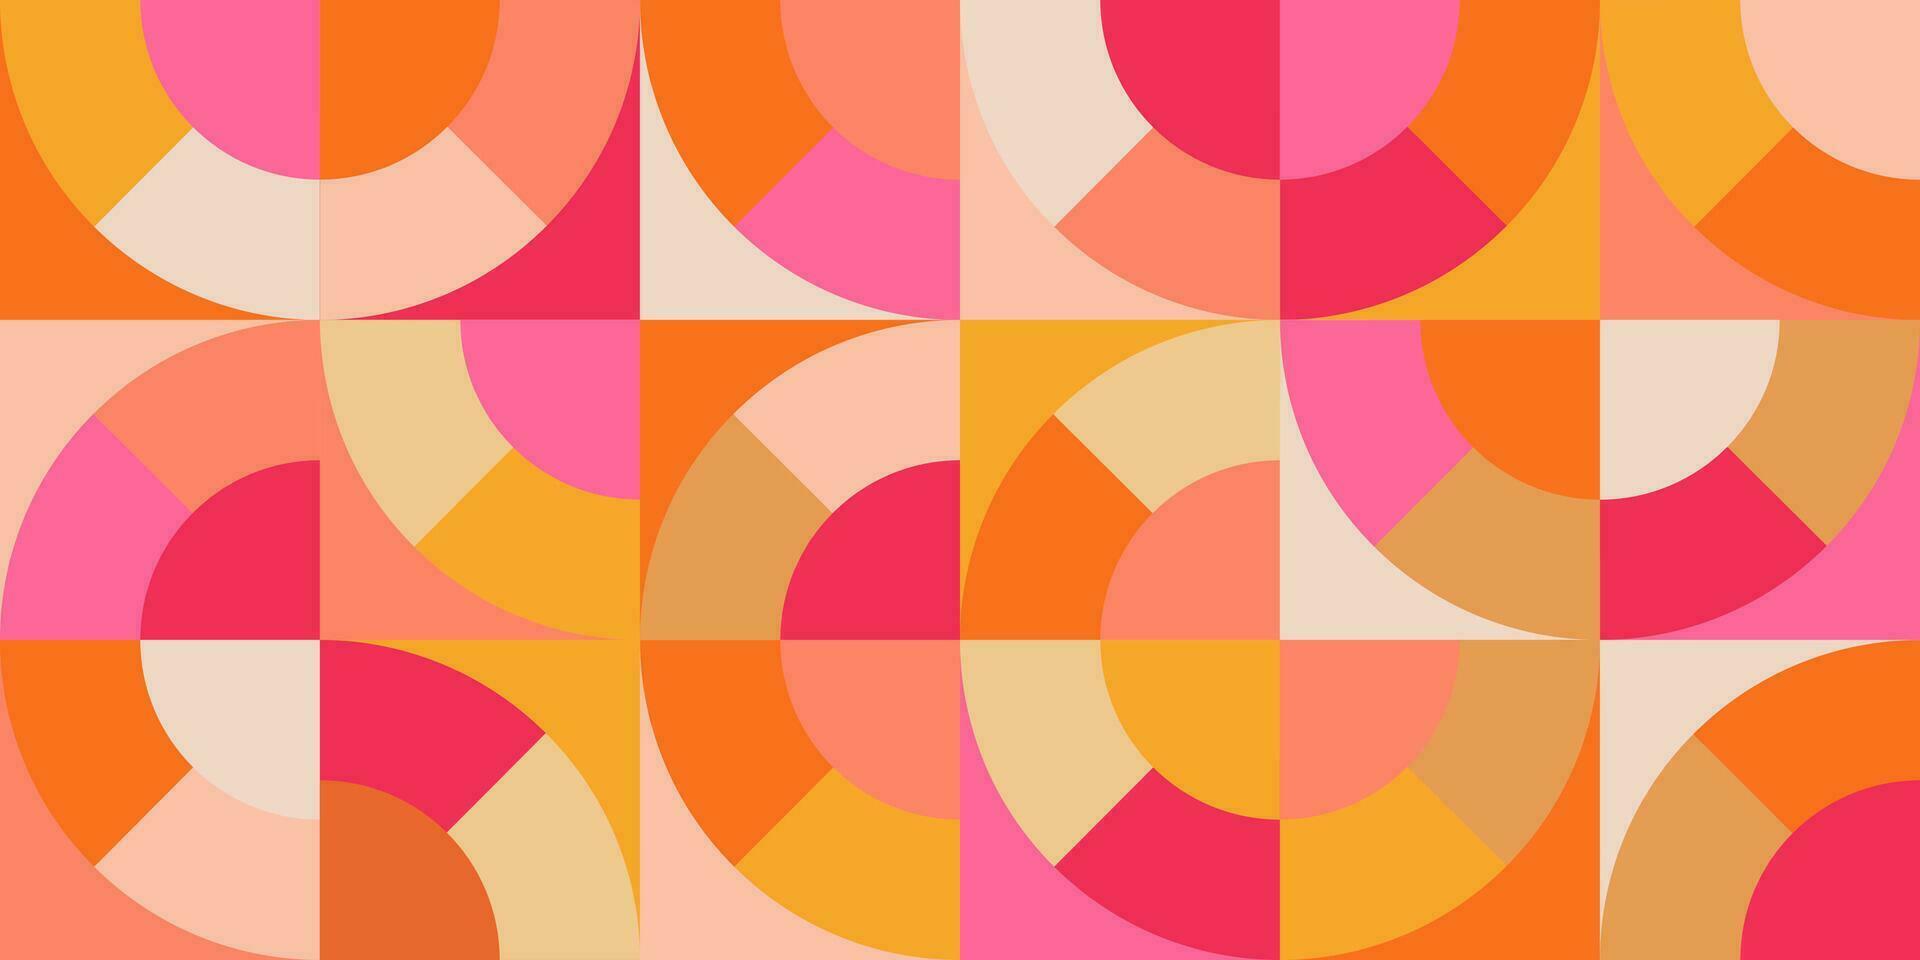 Geometric minimalistic mosaic seamless pattern. Abstract vector for web banner, business presentation, branding, card, invitation, poster, cover, textile print.